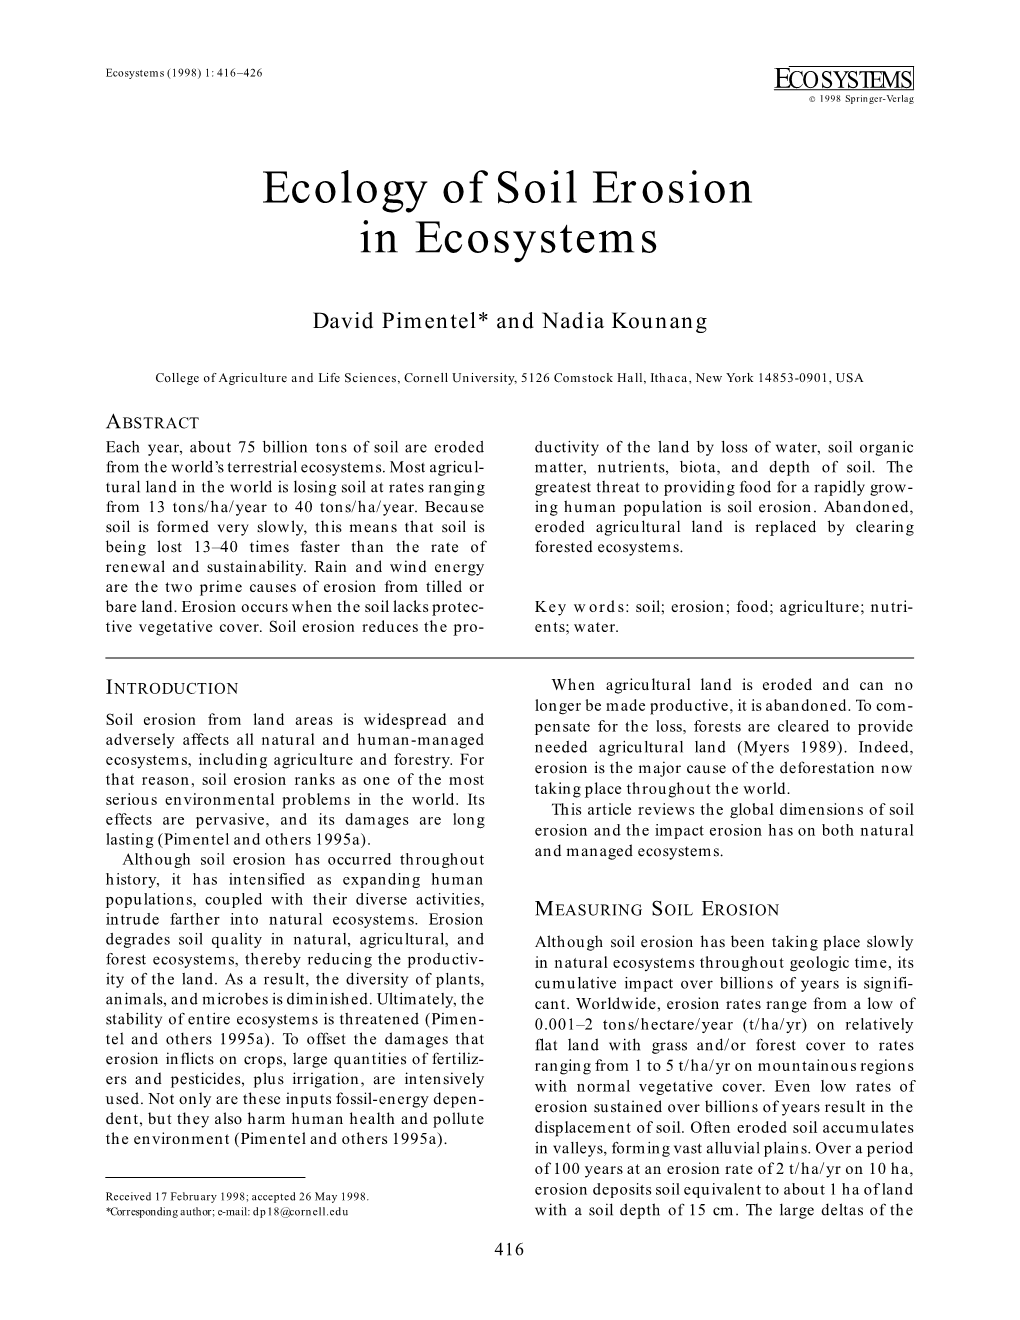 Ecology of Soil Erosion in Ecosystems